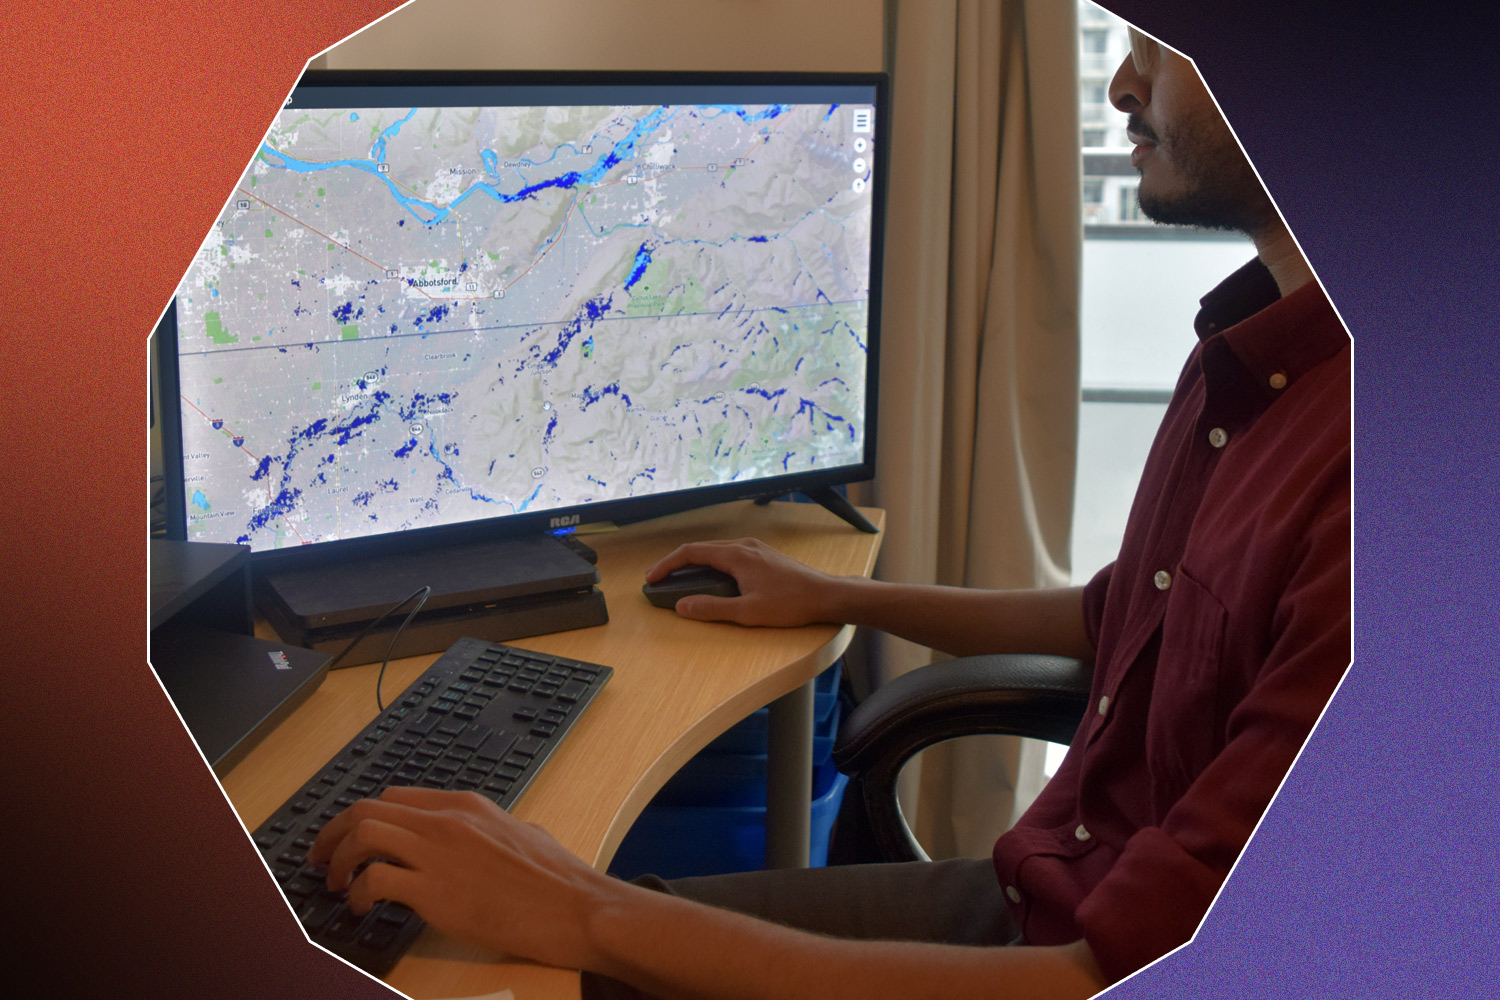 World Flood Mapping Tool being used on a desktop computer by an engineer in a red shirt and glasses on a black, red, and purple background